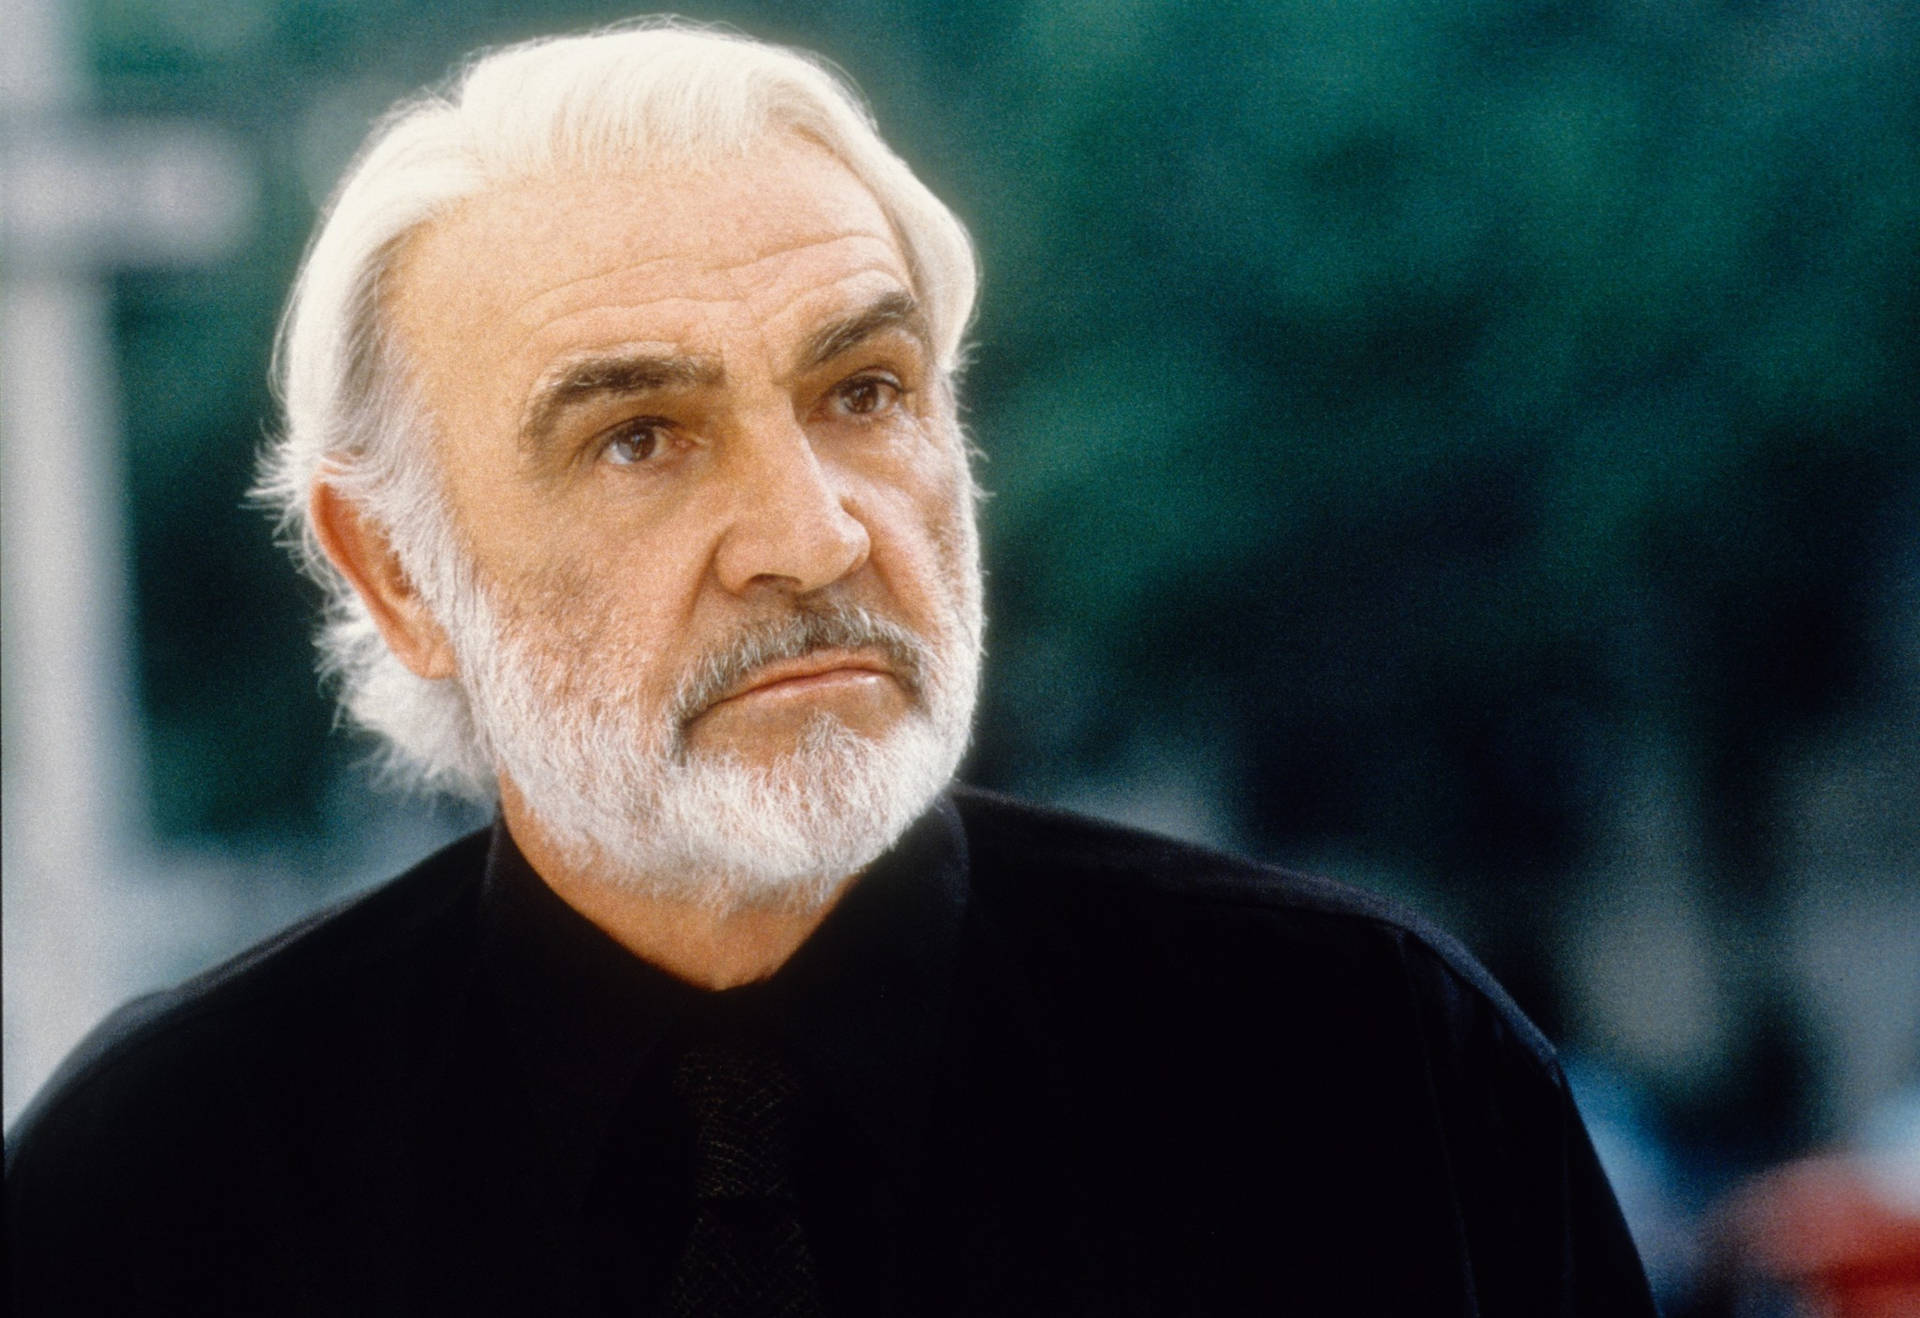 Sean Connery In Finding Forrester Wallpaper